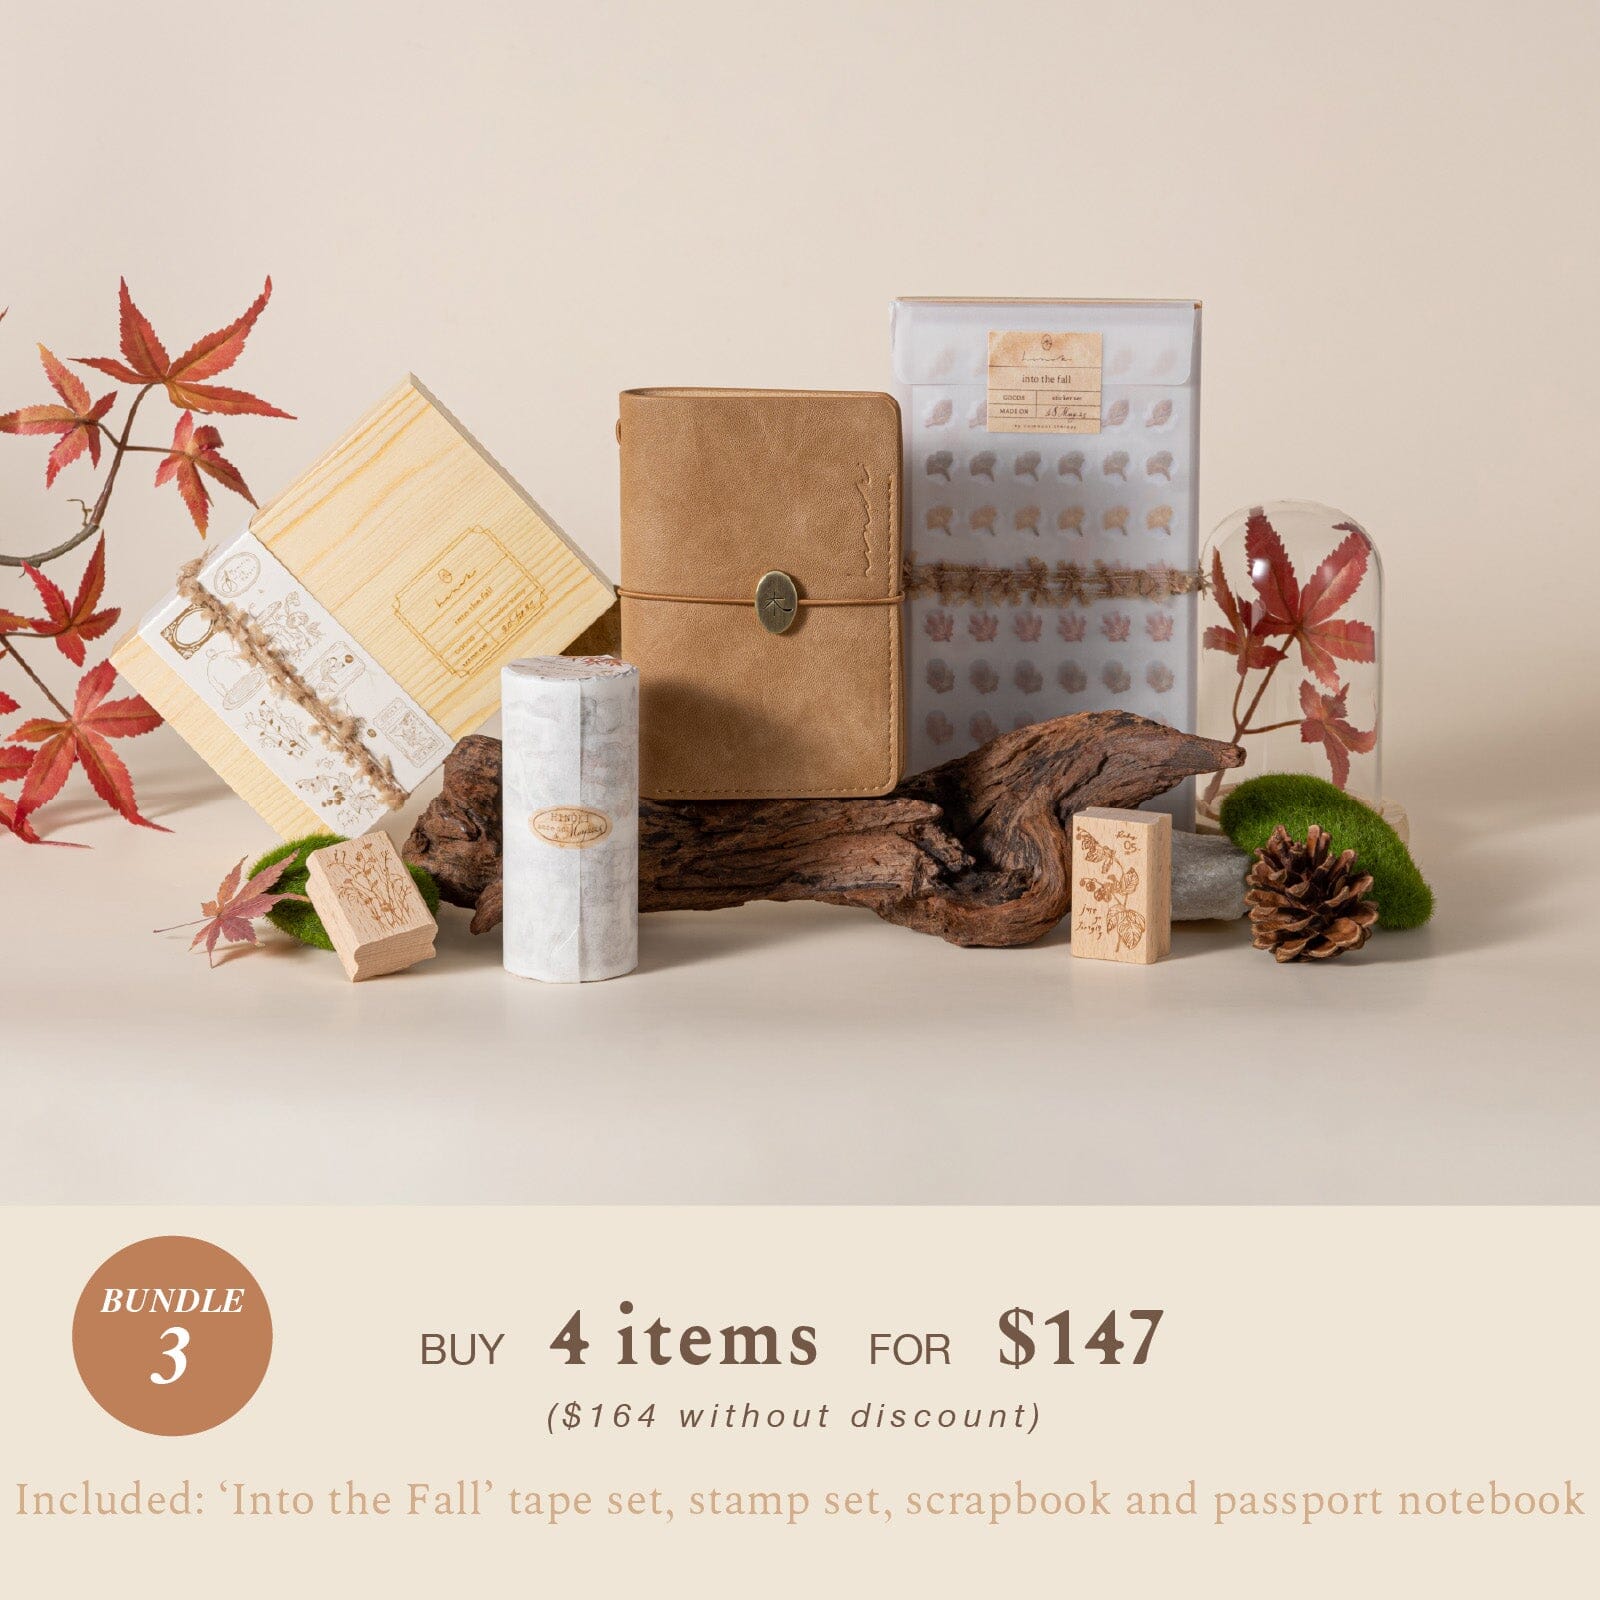 Hinoki - 'Into the Fall' Decorative PET Tape Set – NotebookTherapy